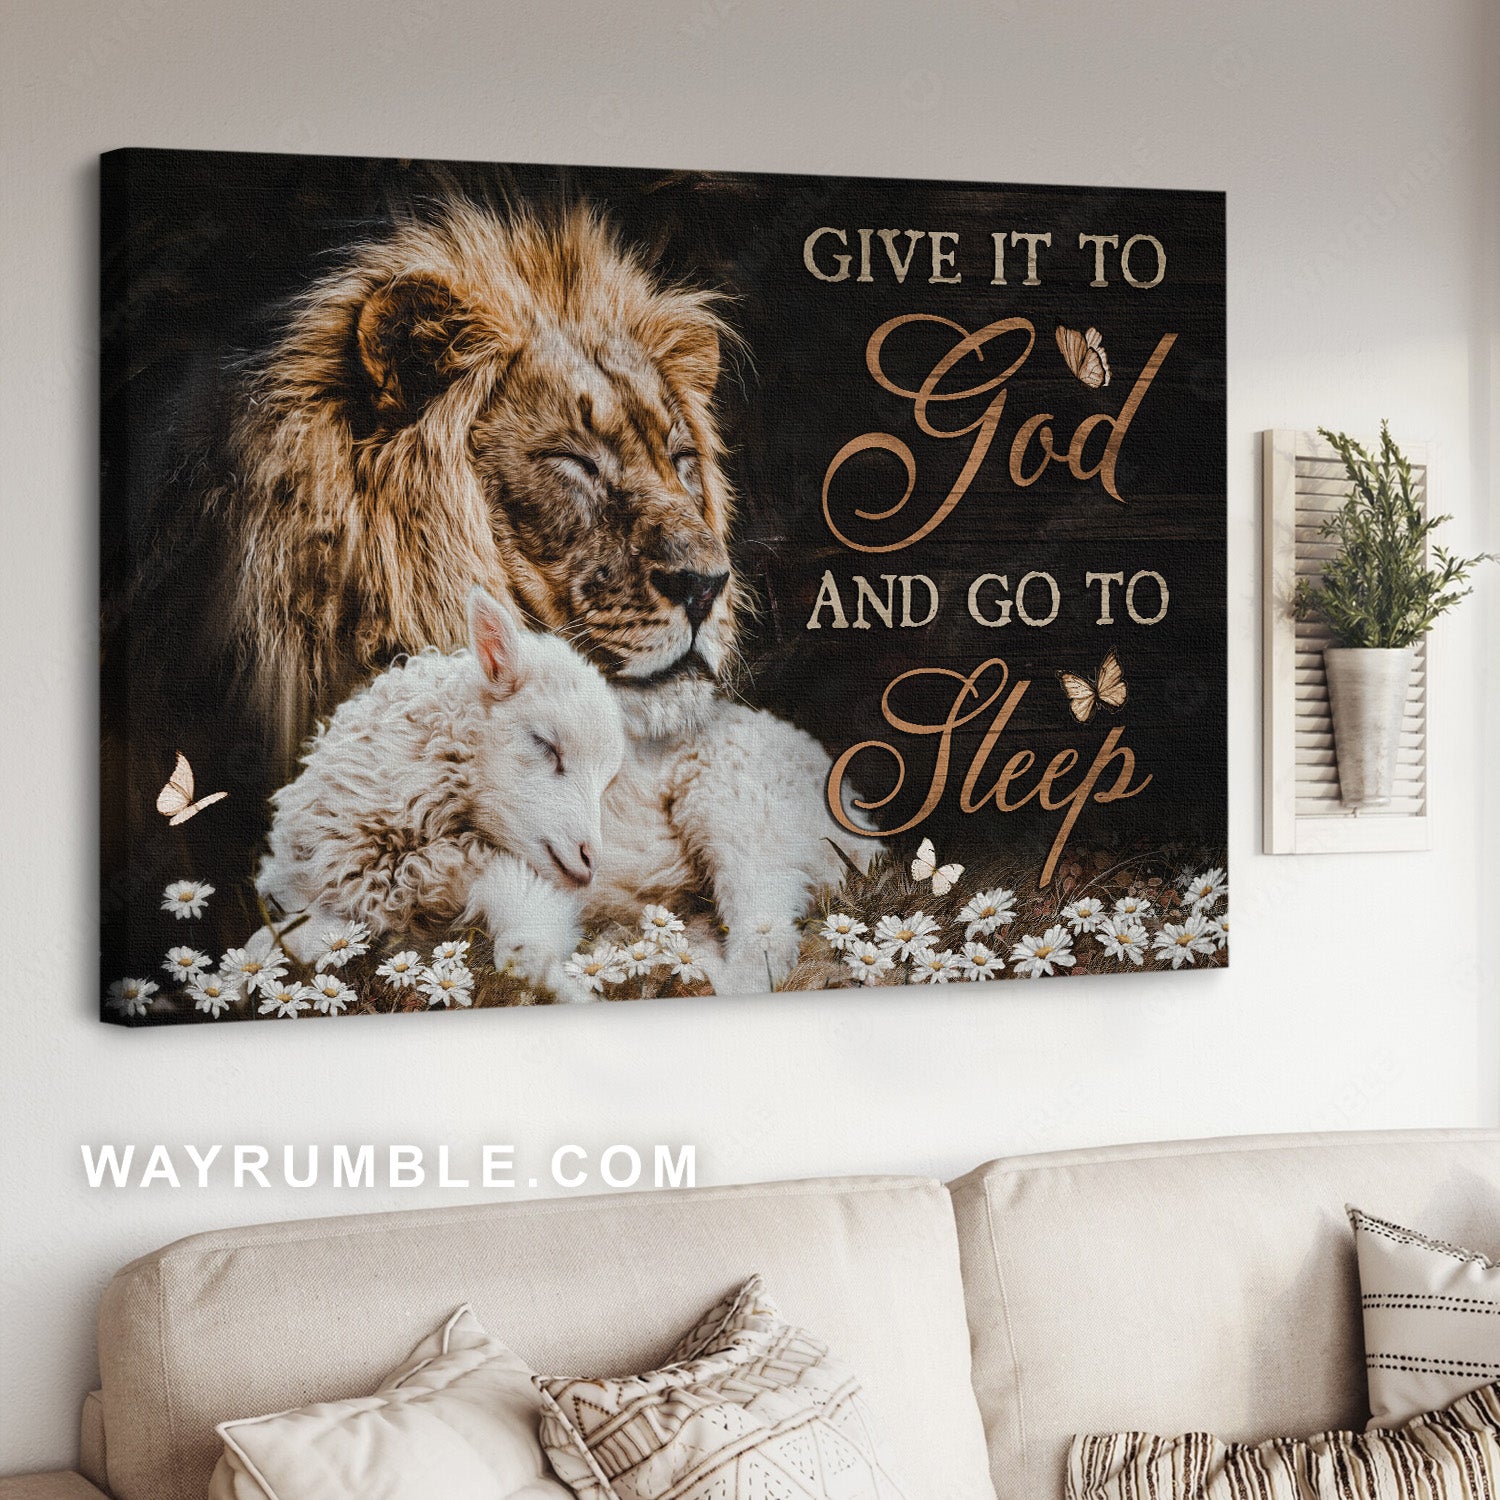 Lion of Judah, Lovely lamb, Daisy flower, Give it to God and go to sleep - Jesus Landscape Canvas Prints, Home Decor Wall Art